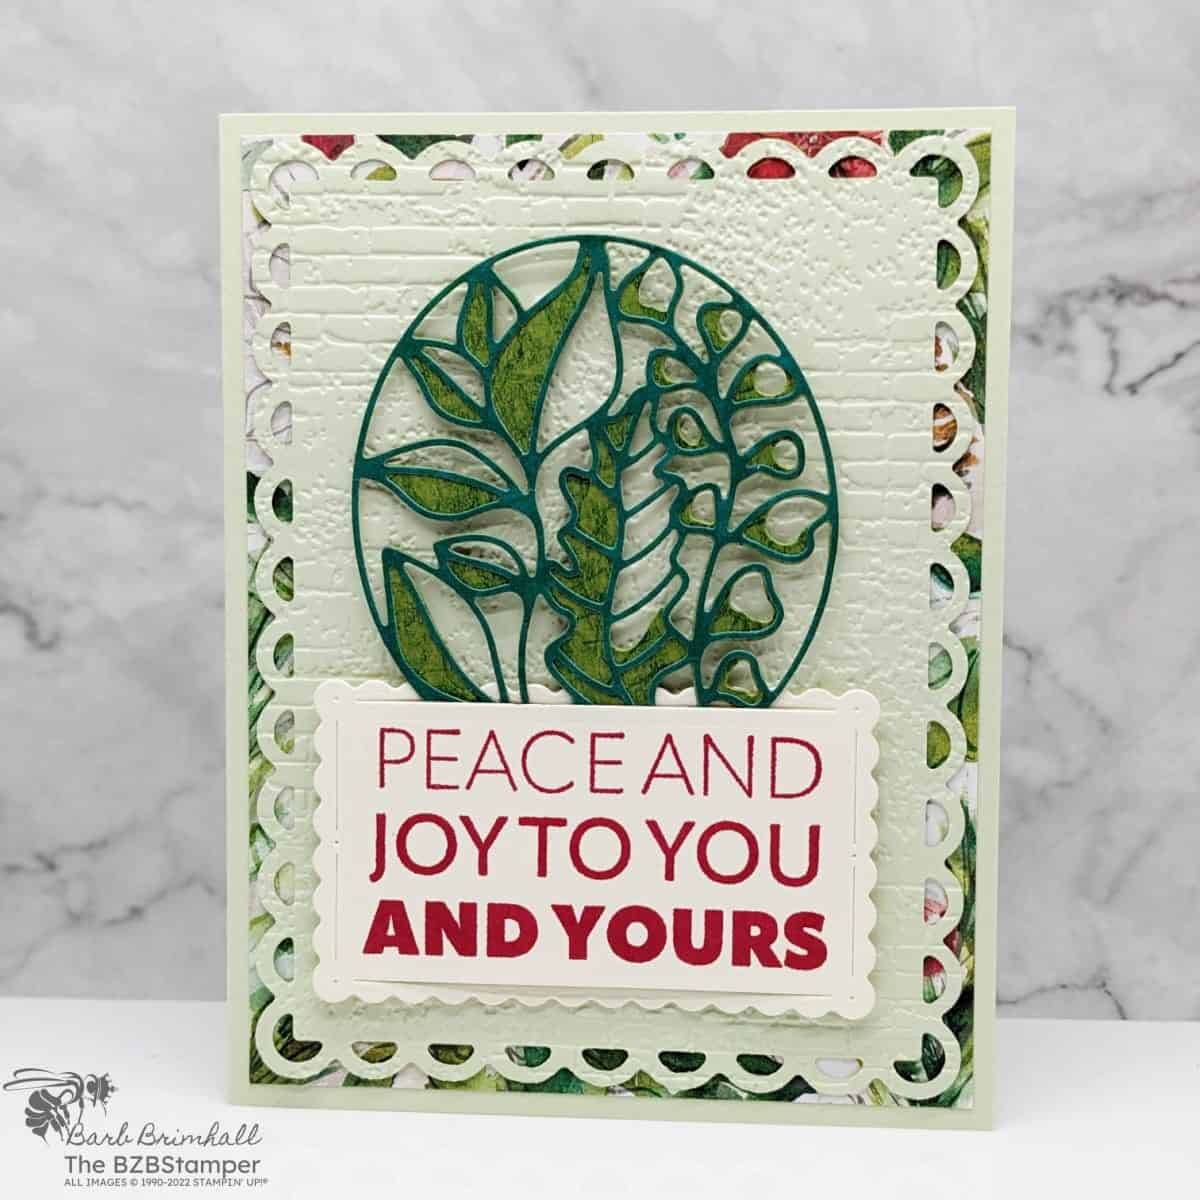 Elegant Joy To You Christmas card in green and red with many die-cut images and a sentiment "Peace and Joy to You and Yours."